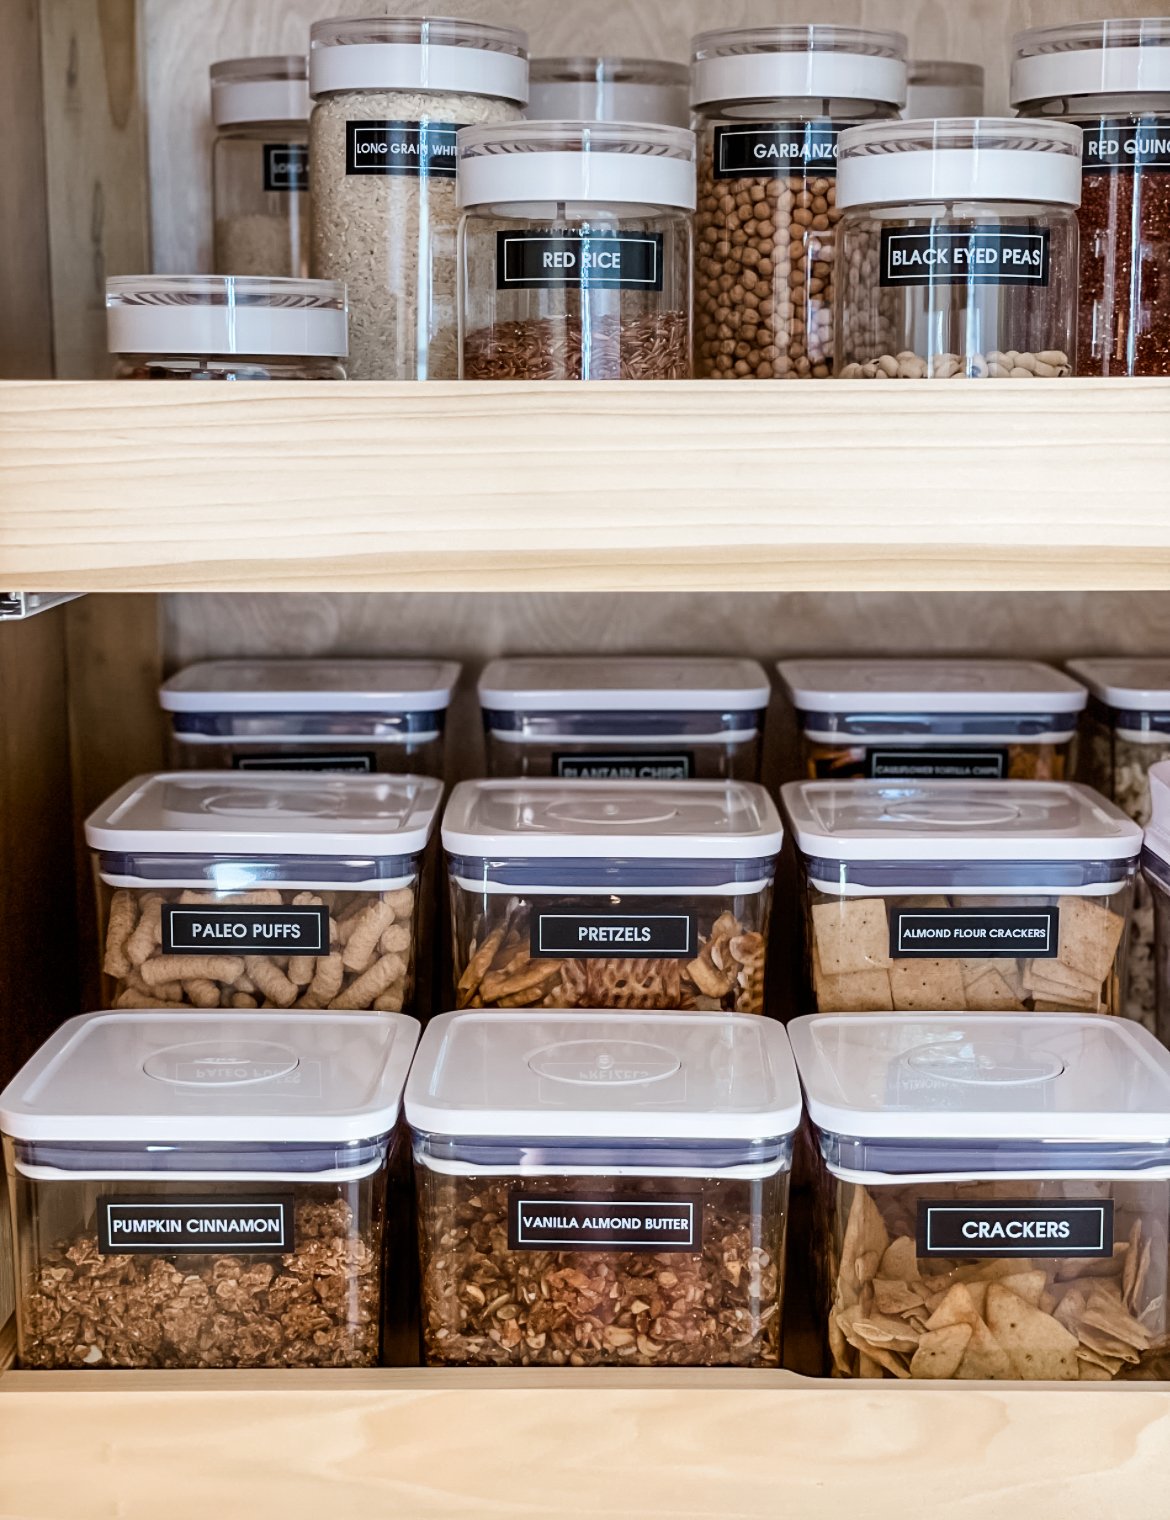 Why A Kitchen Drawer Might Make More Sense For Snack Storage Than A Pantry